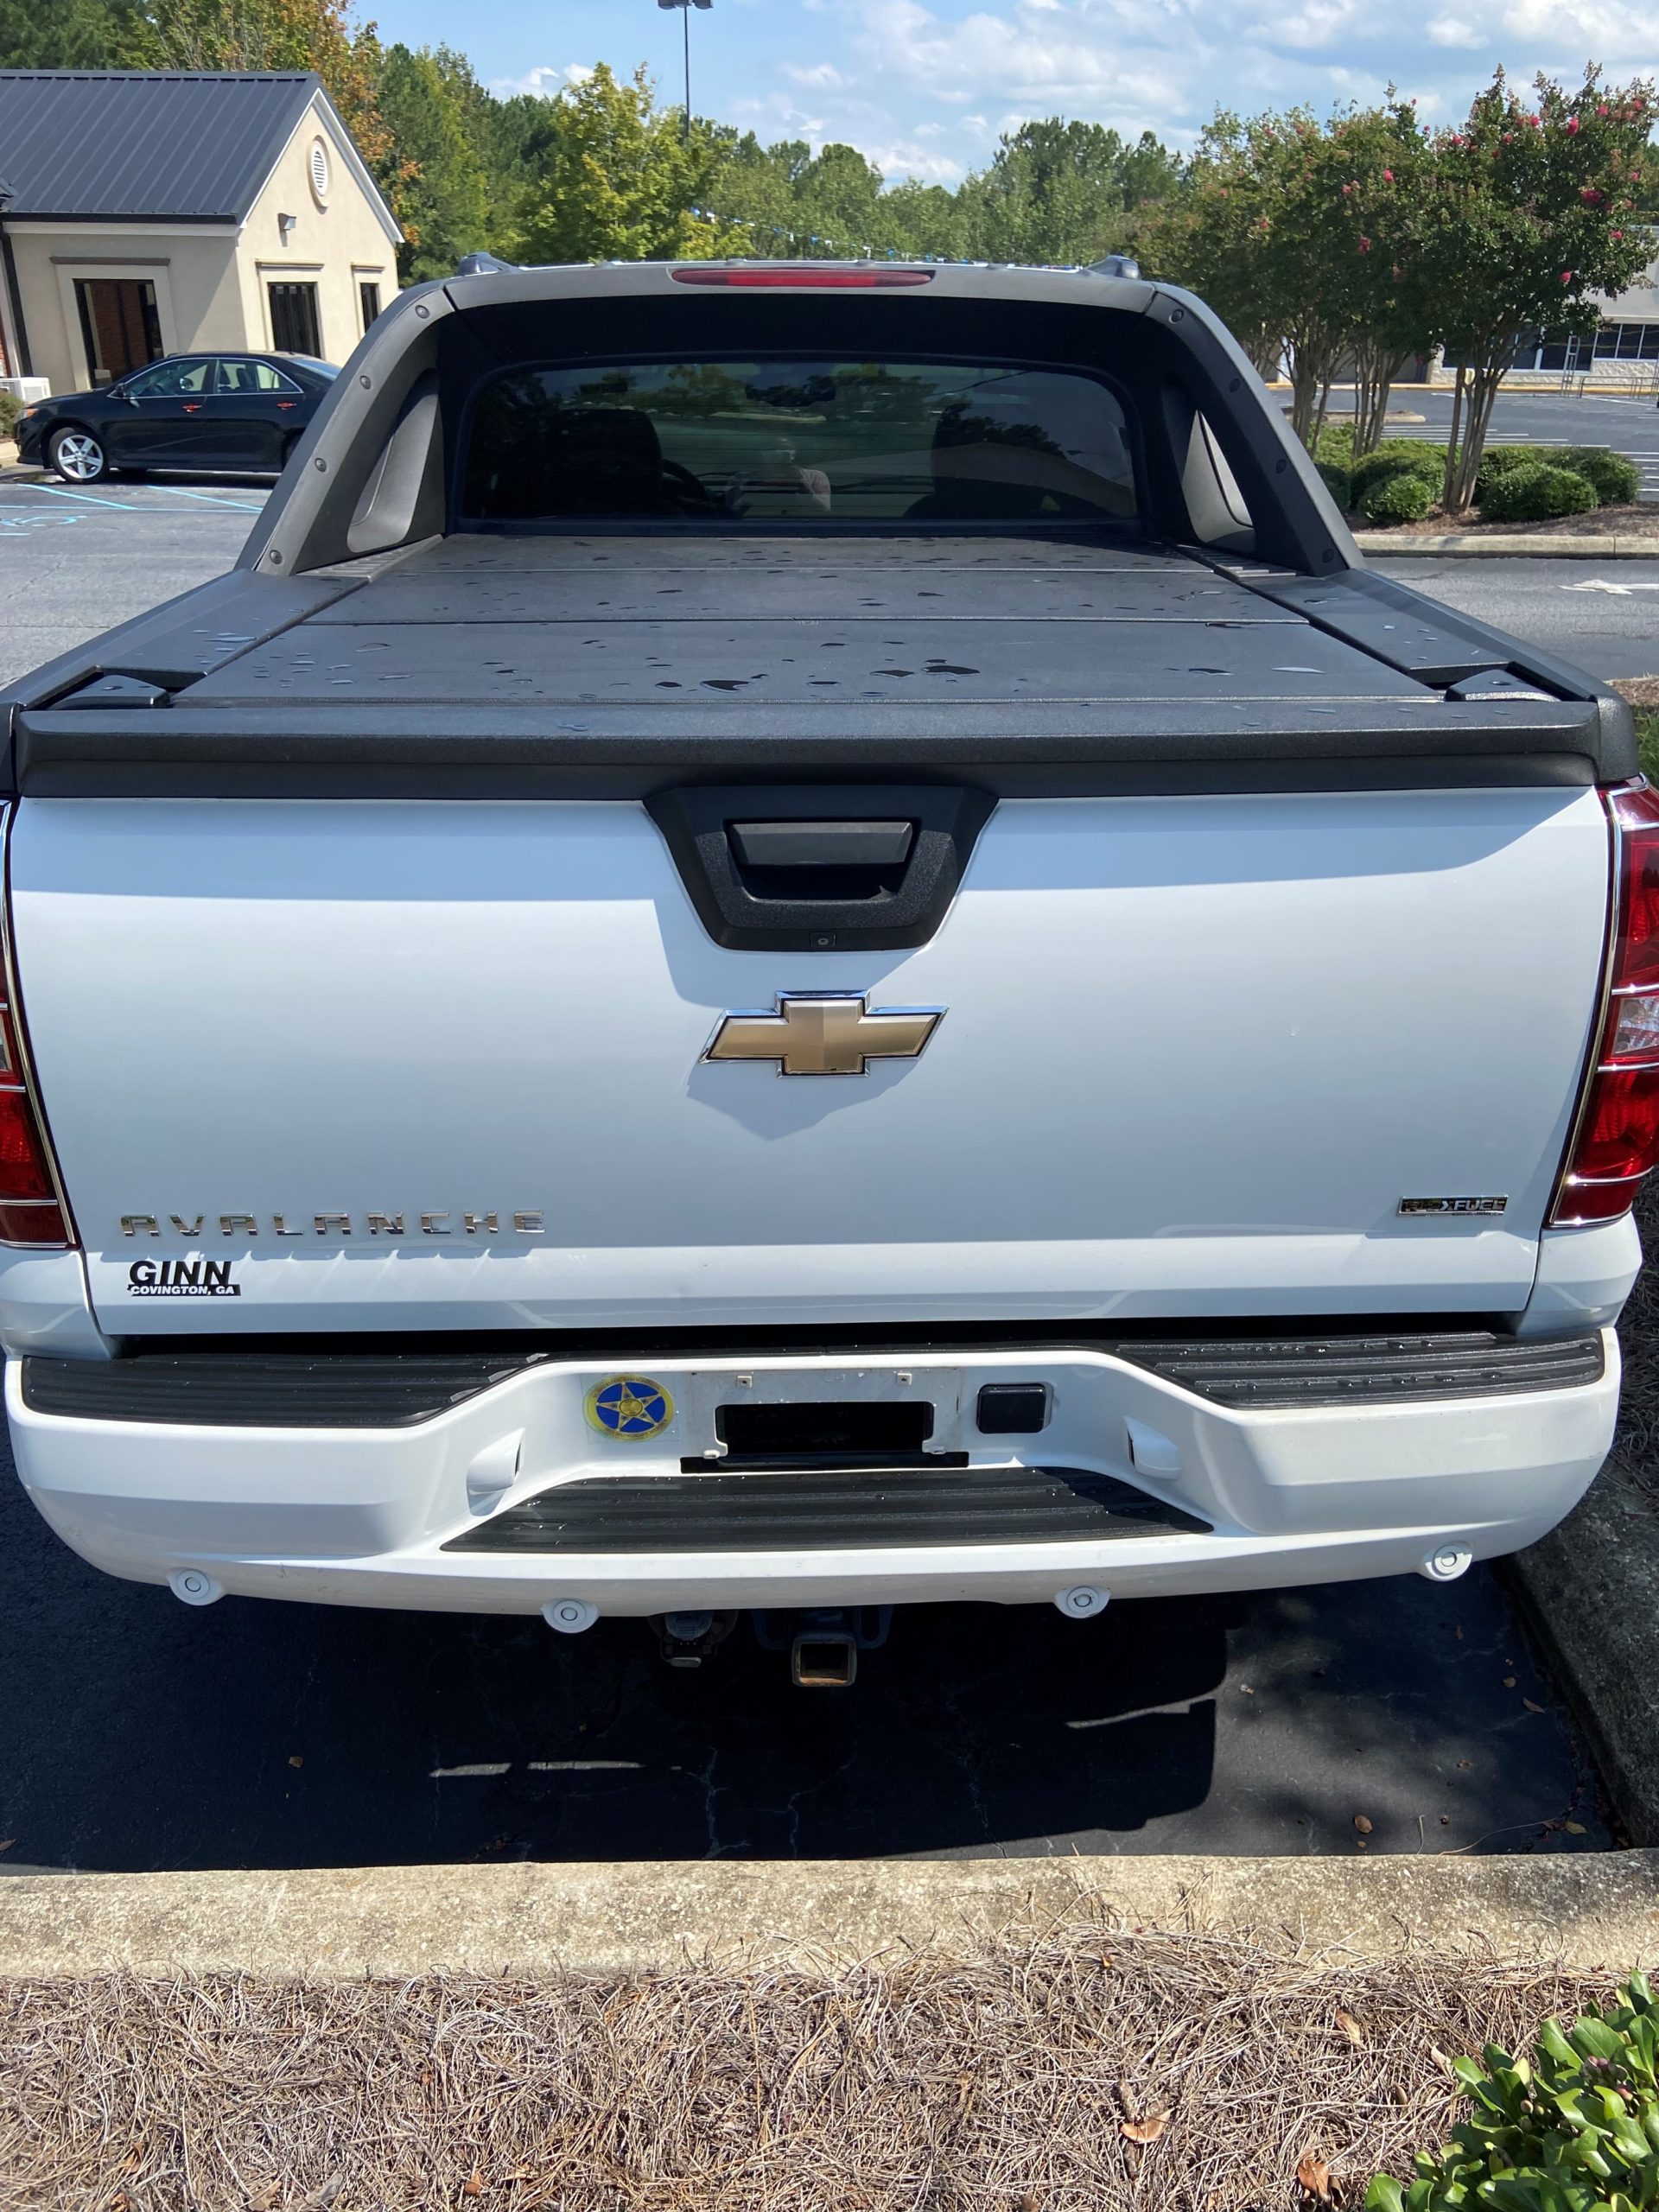 Truck bed of large White Chevrolet